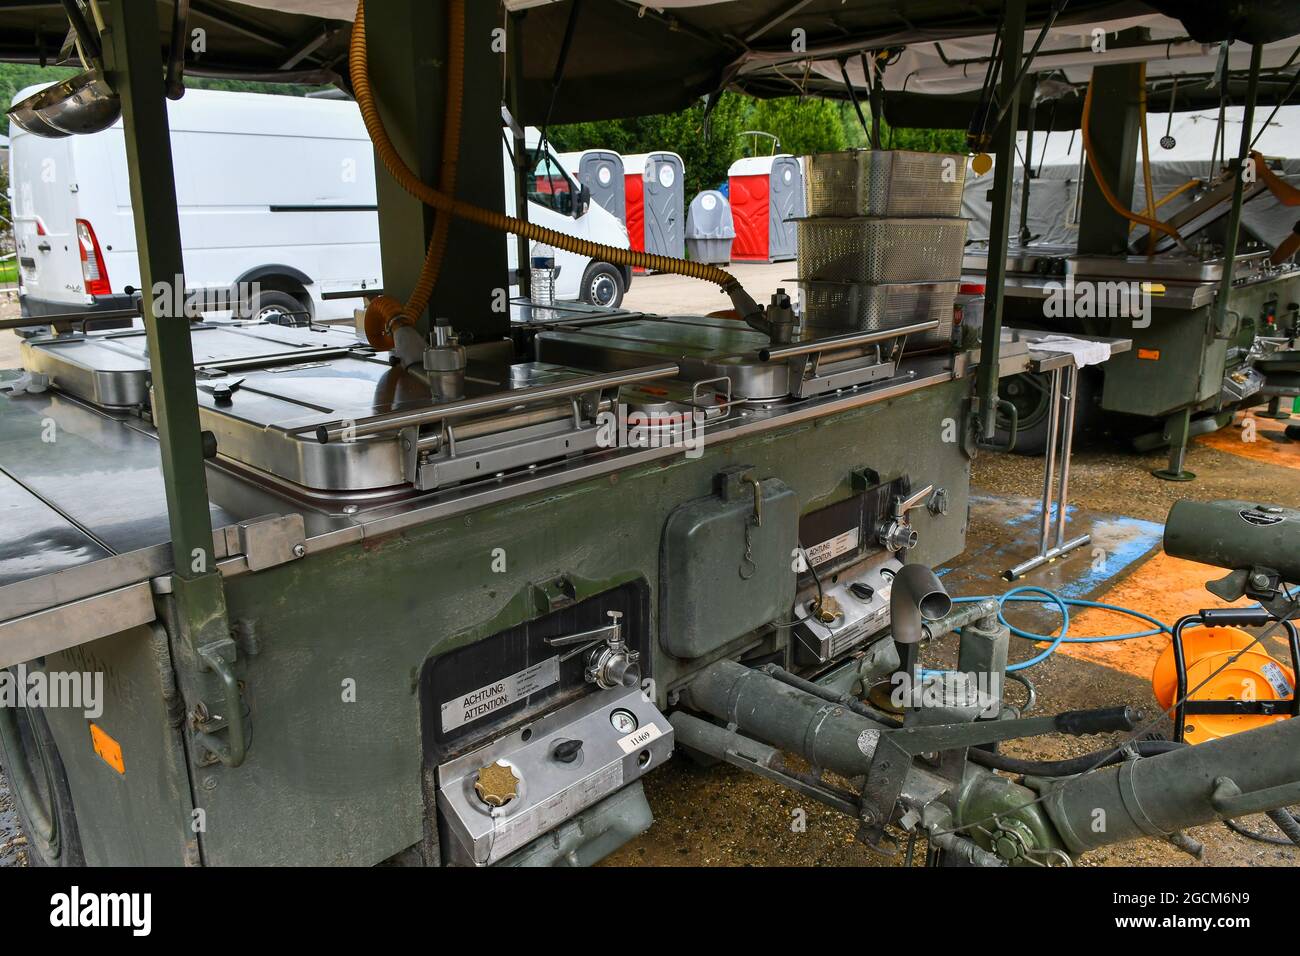 Illustration shows  a mobile kitchen installed and run by the army, in the 'Parc des Sources', in Chaudfontaine on Monday 09 August 2021. The region w Stock Photo